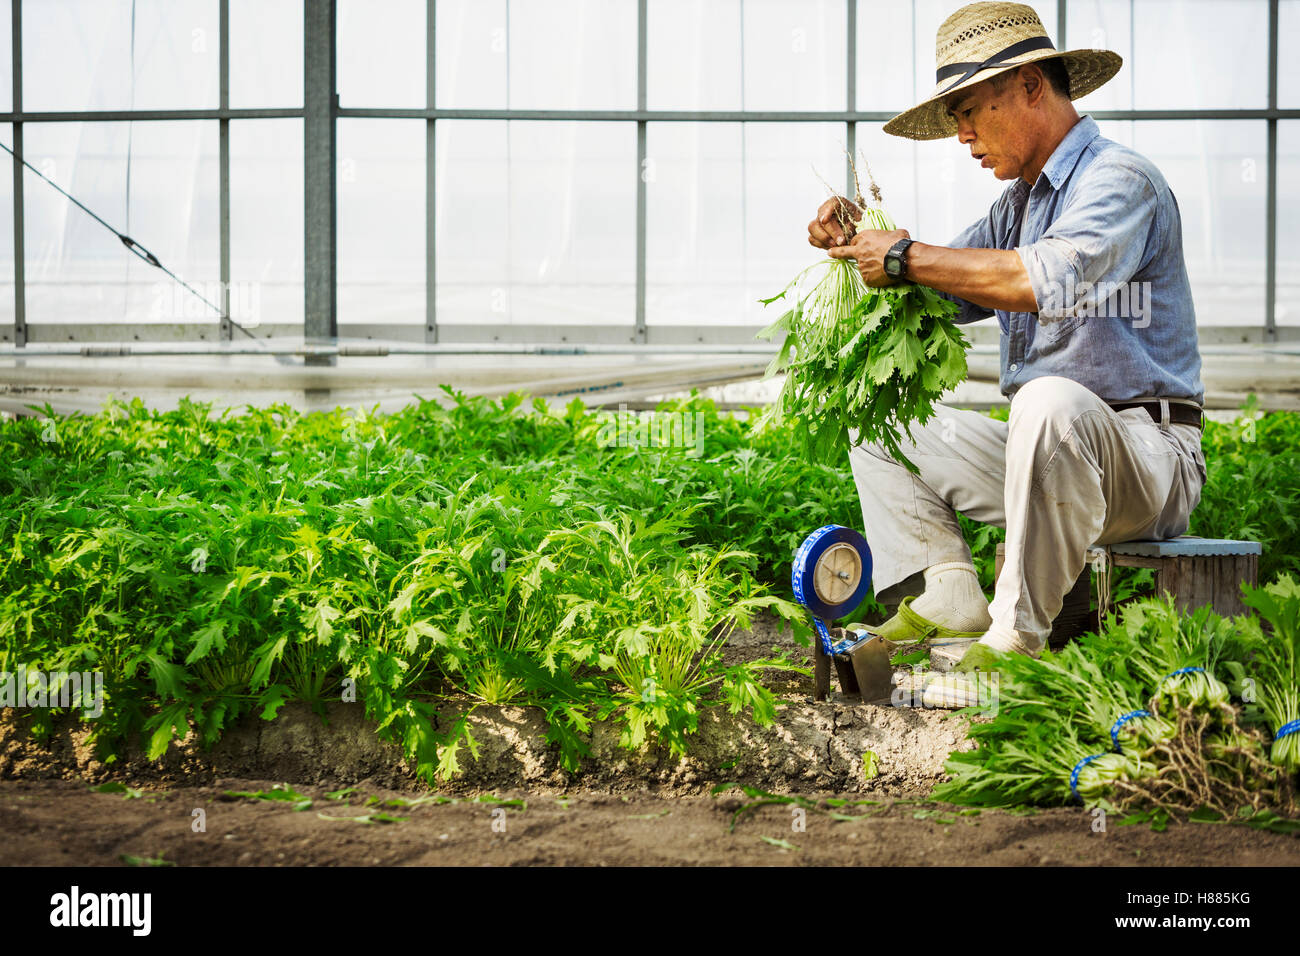 A man working in a greenhouse harvesting a commercial crop, the mizuna vegetable plant. Stock Photo